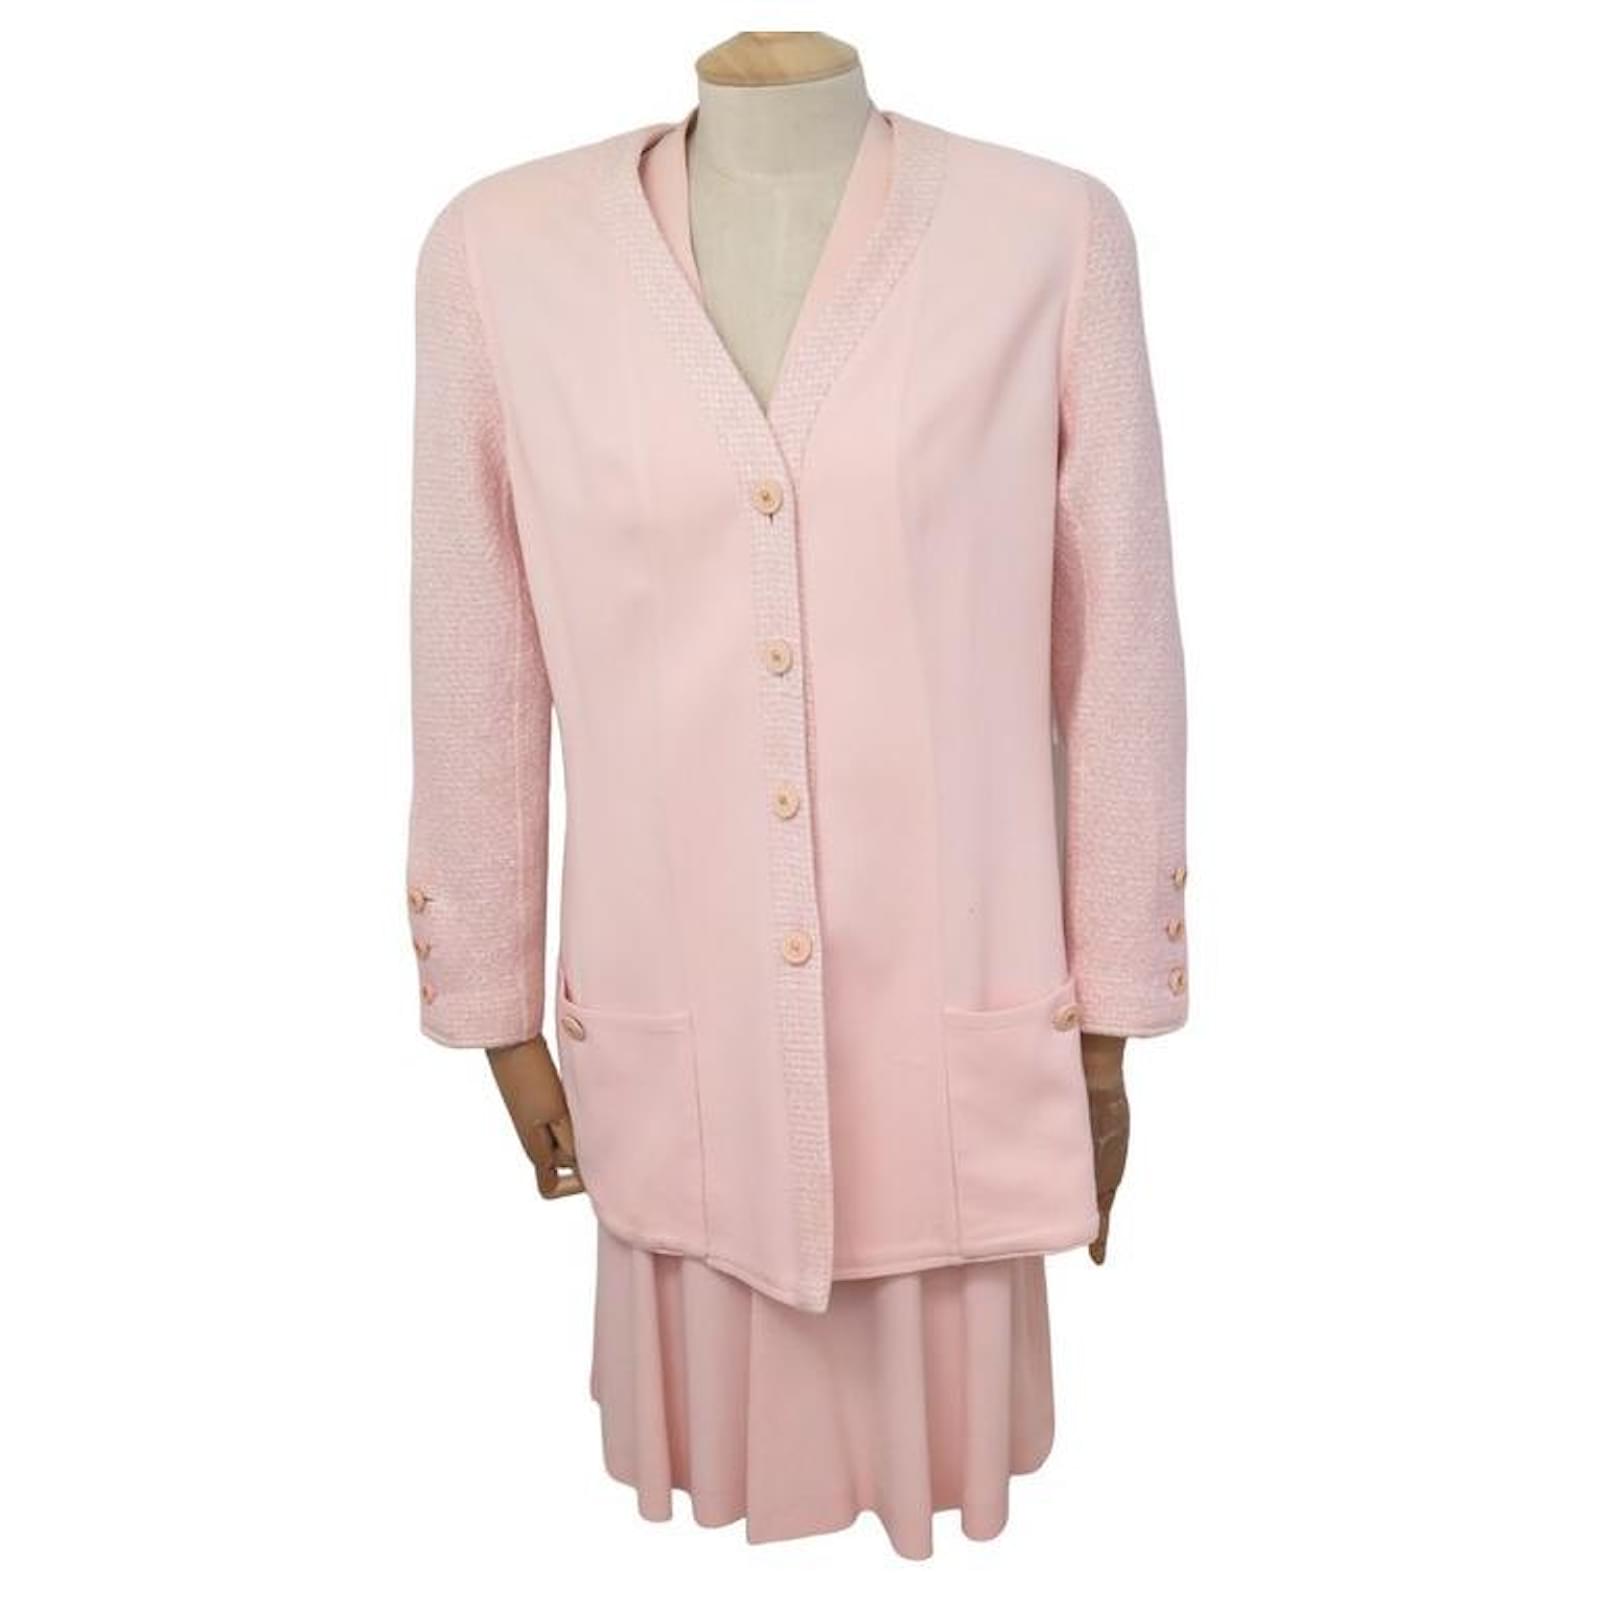 Jackets Chanel Tailored Jacket + Chanel T DRESS40 M in Tweed Pink Jacket Dress Suit